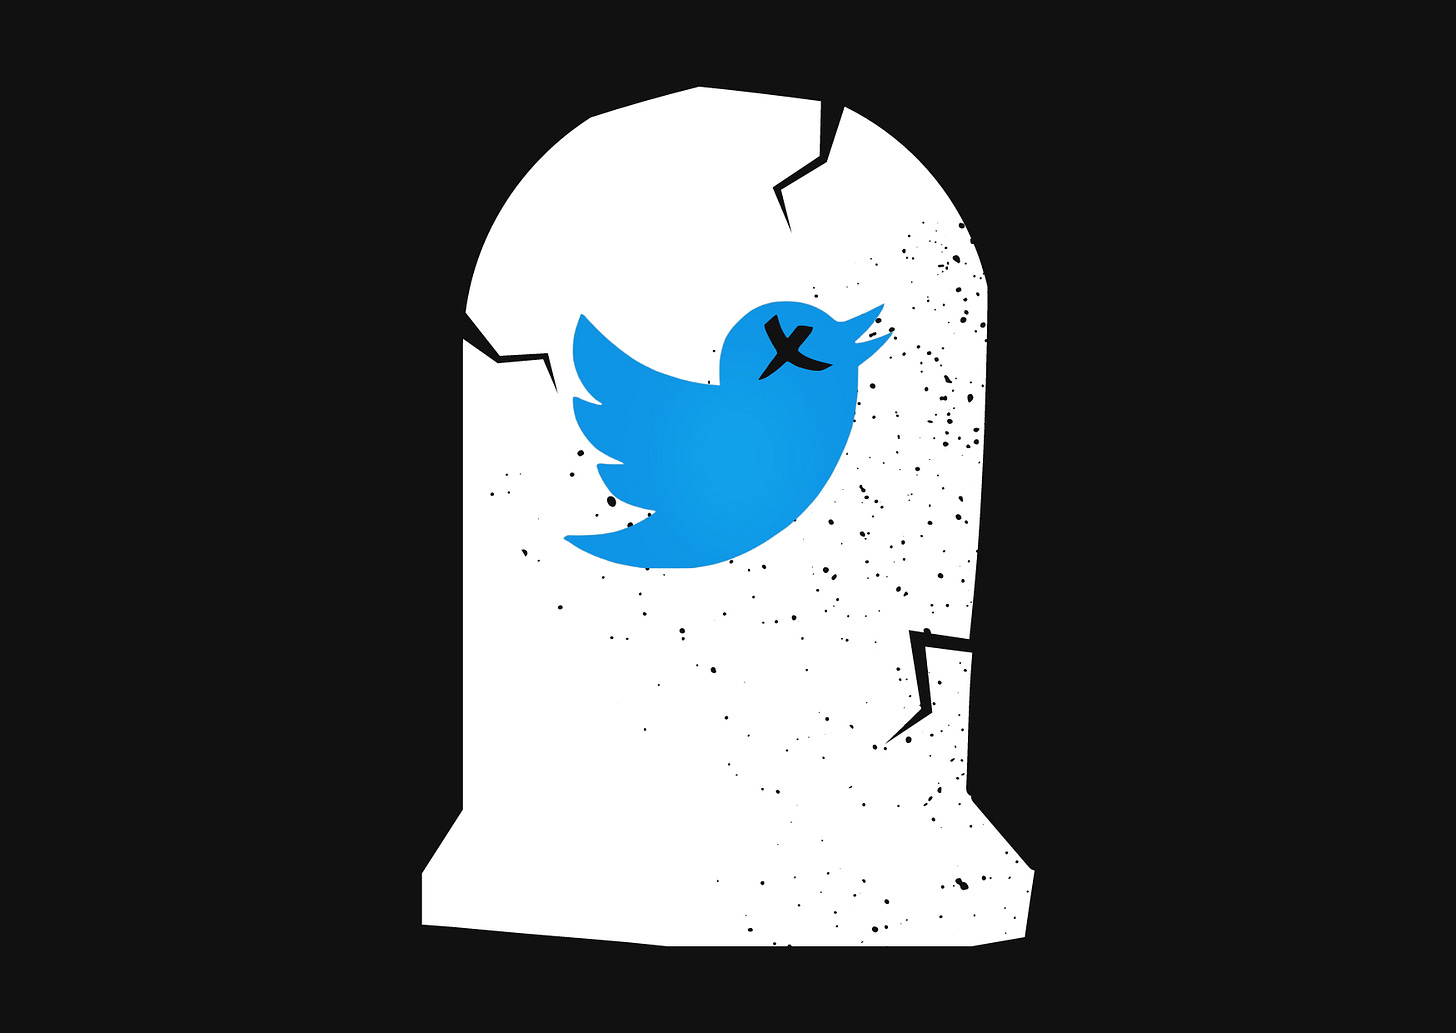 A white tombstone on a black background, it is emblazoned with a Twtter bird that has an X for an eye